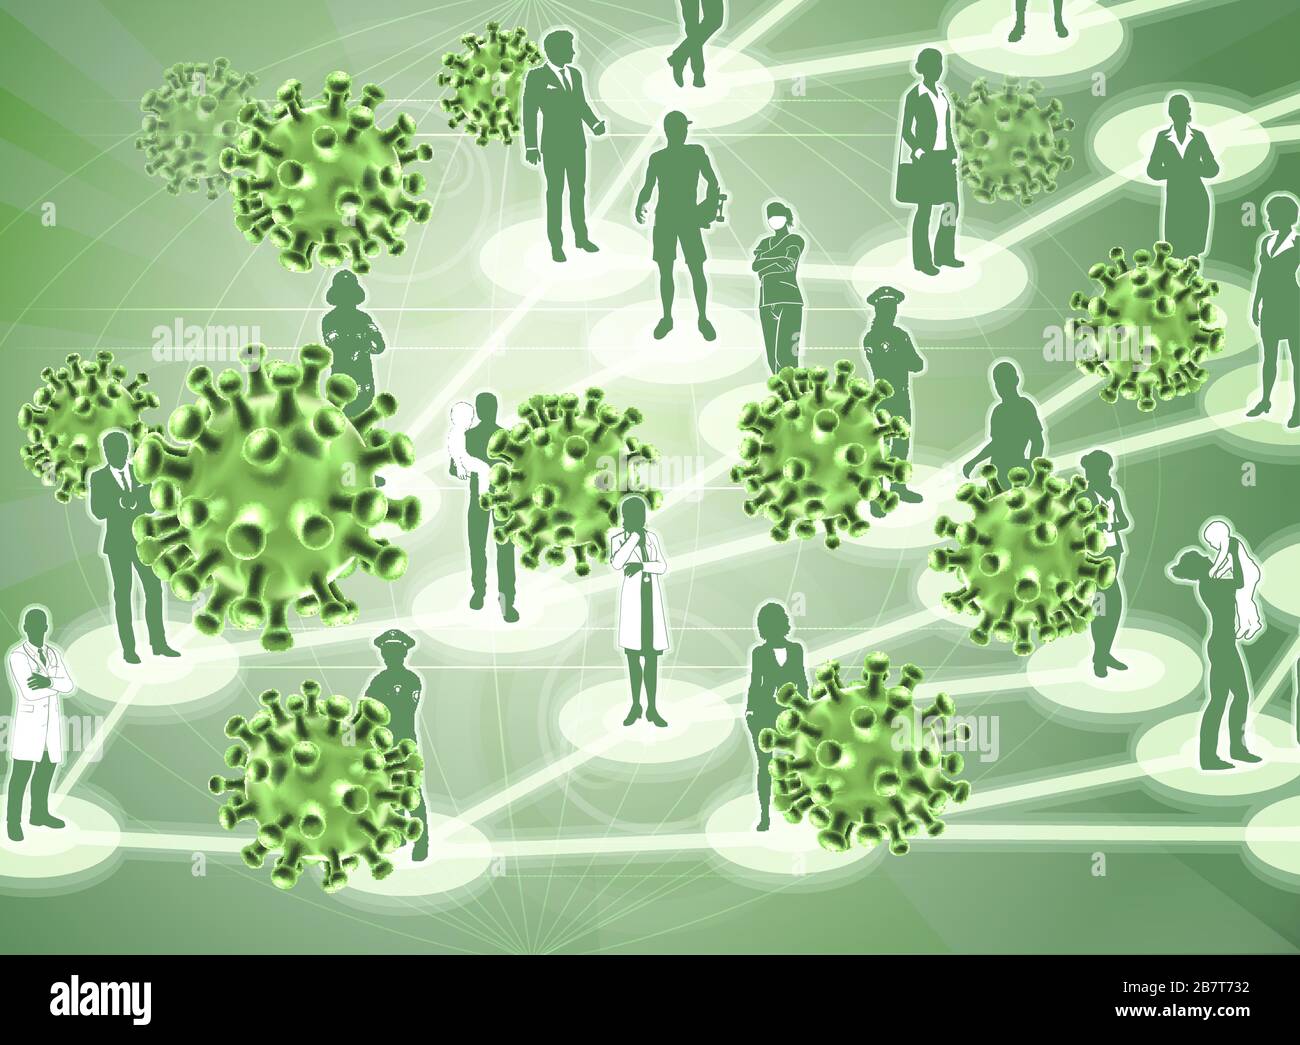 Virus Cells Viral Spread Pandemic People Concept Stock Vector